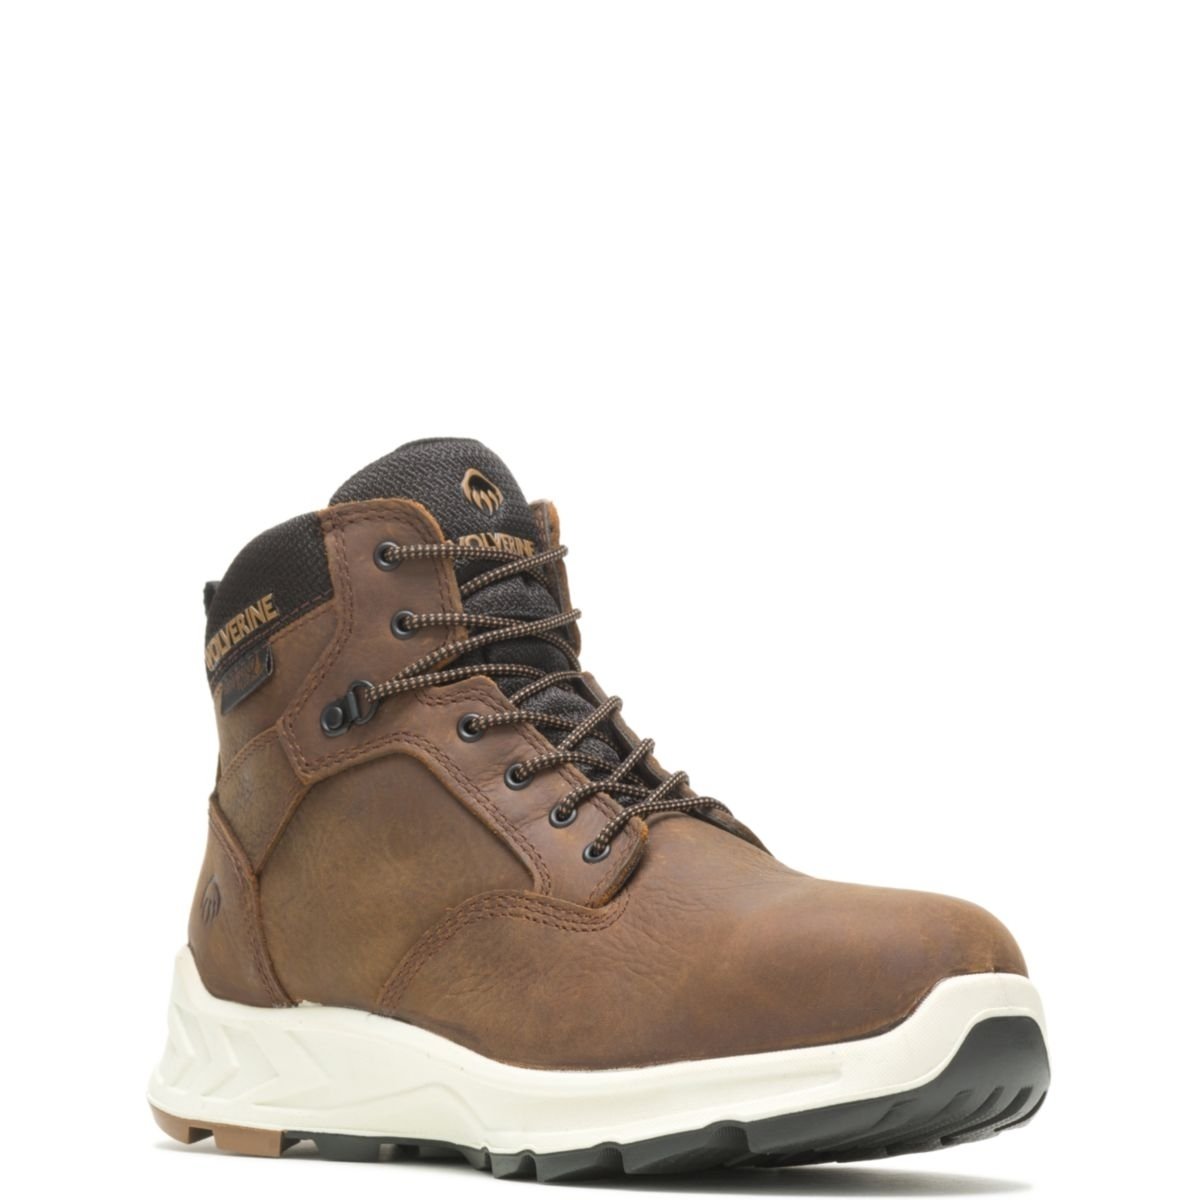 WOLVERINE Men's ShiftPlus Work LX 6 Alloy Toe Work Boot Brown - W201156 BROWN - BROWN, 11.5-M